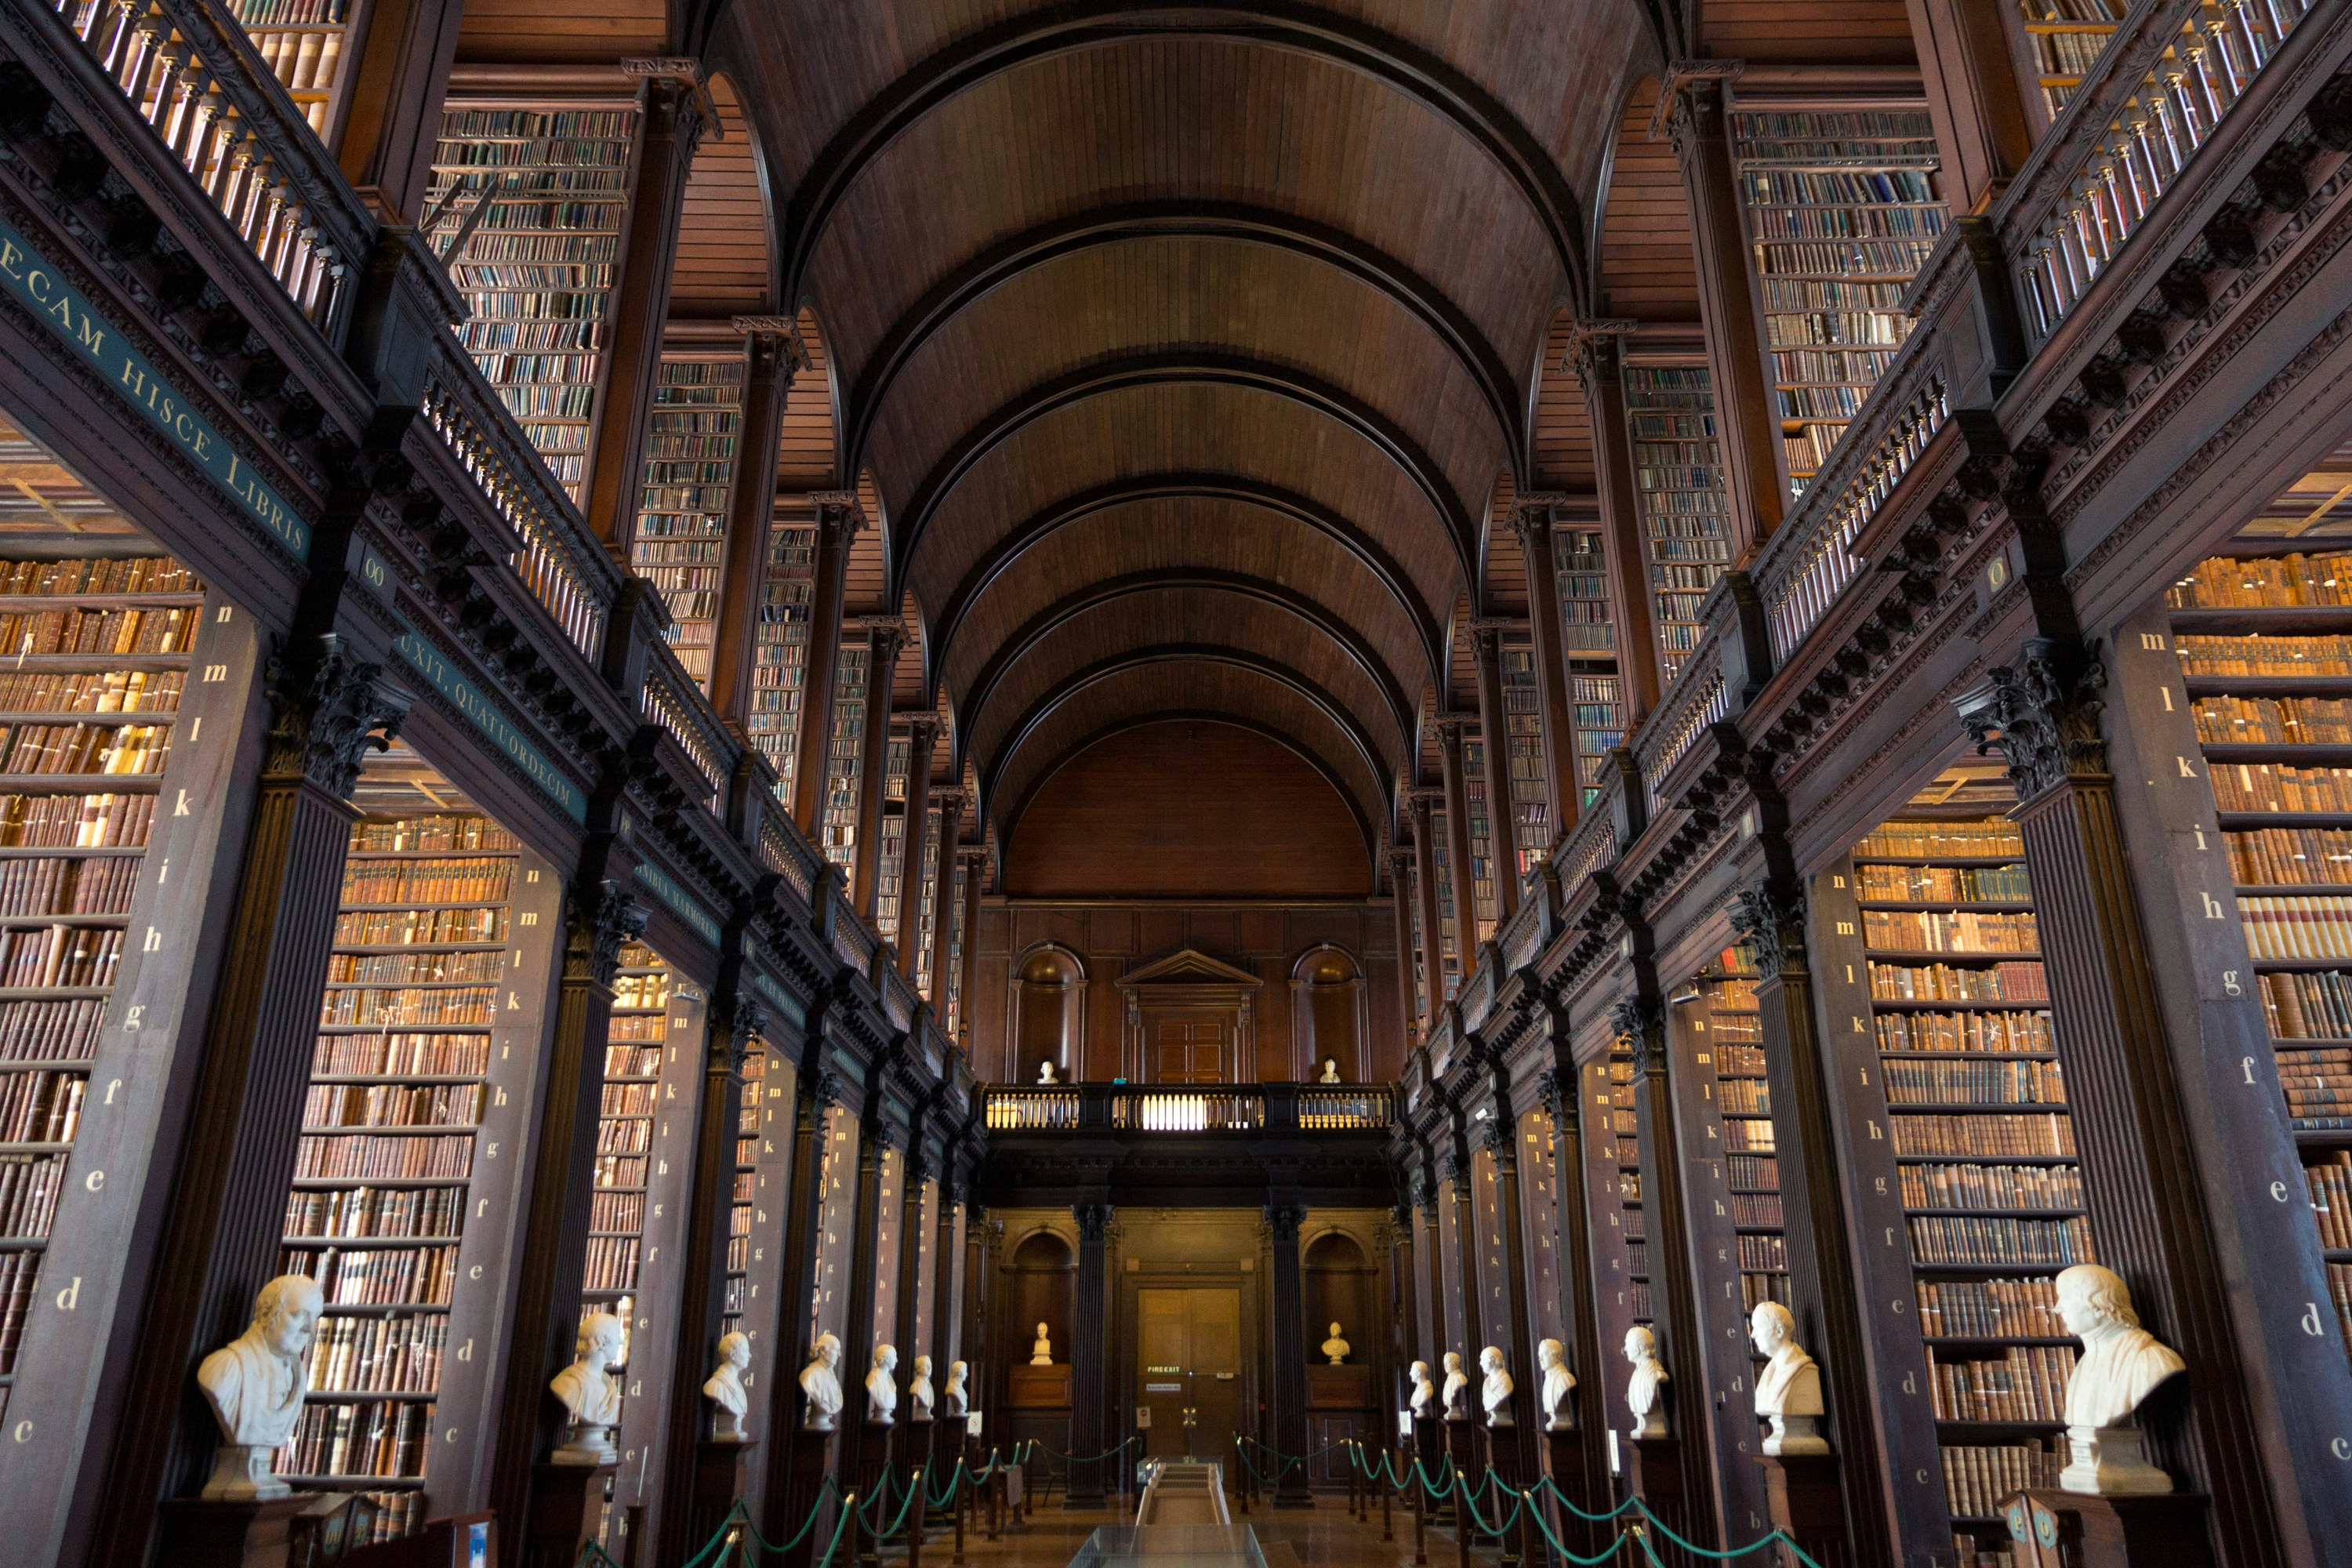 The Long Room in the Trinity College Library